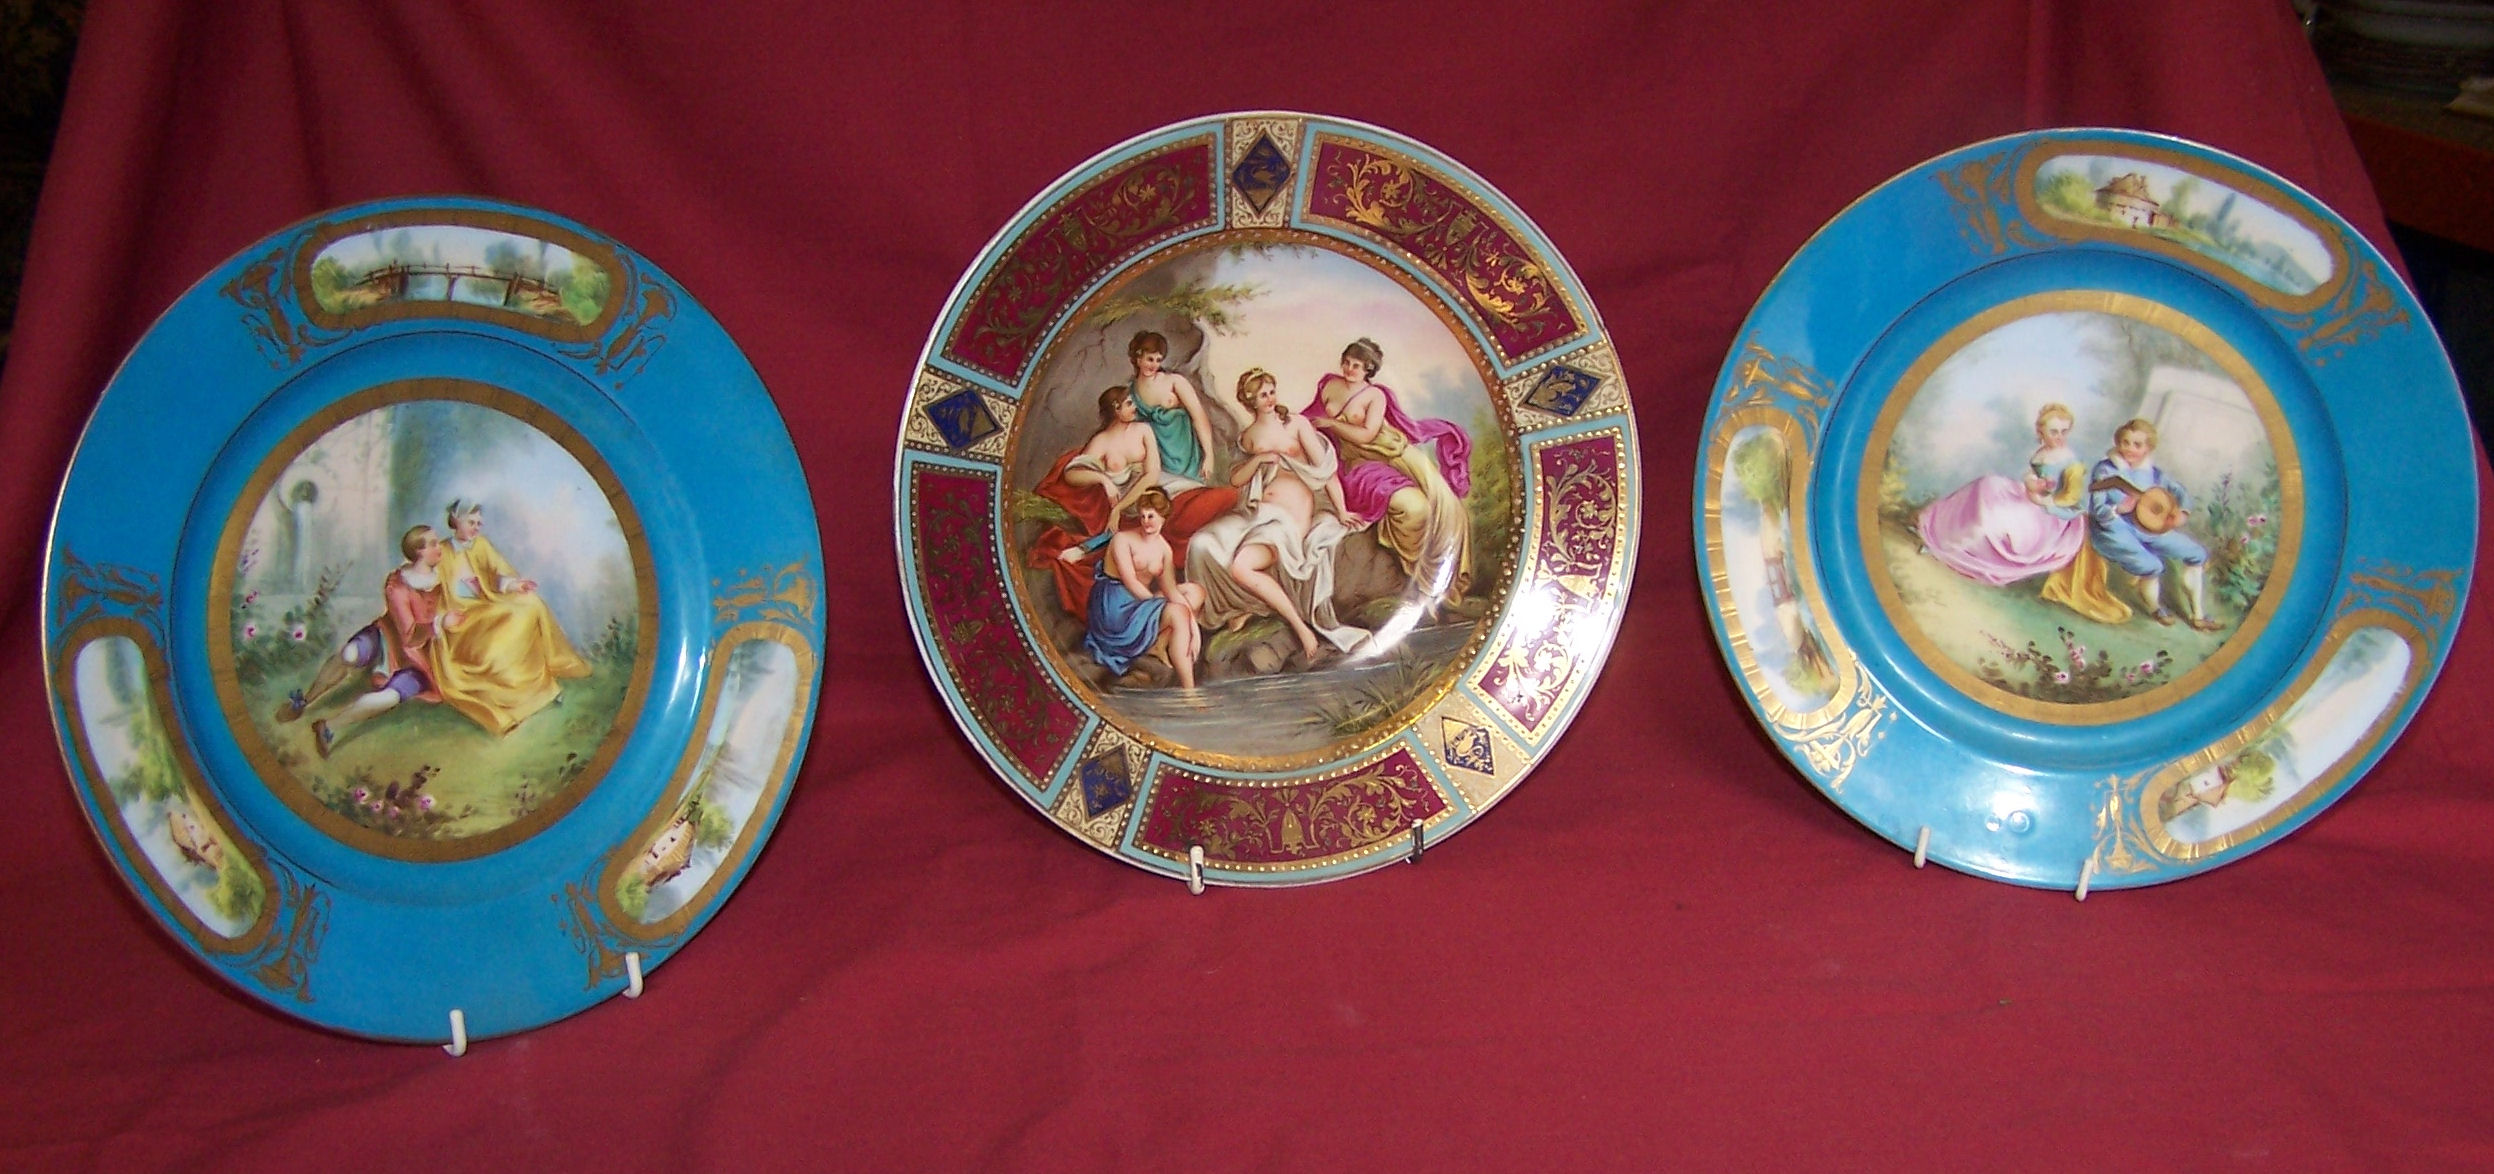 A pair of 19th century French porcelain Plates decorated with figures in a country garden within a